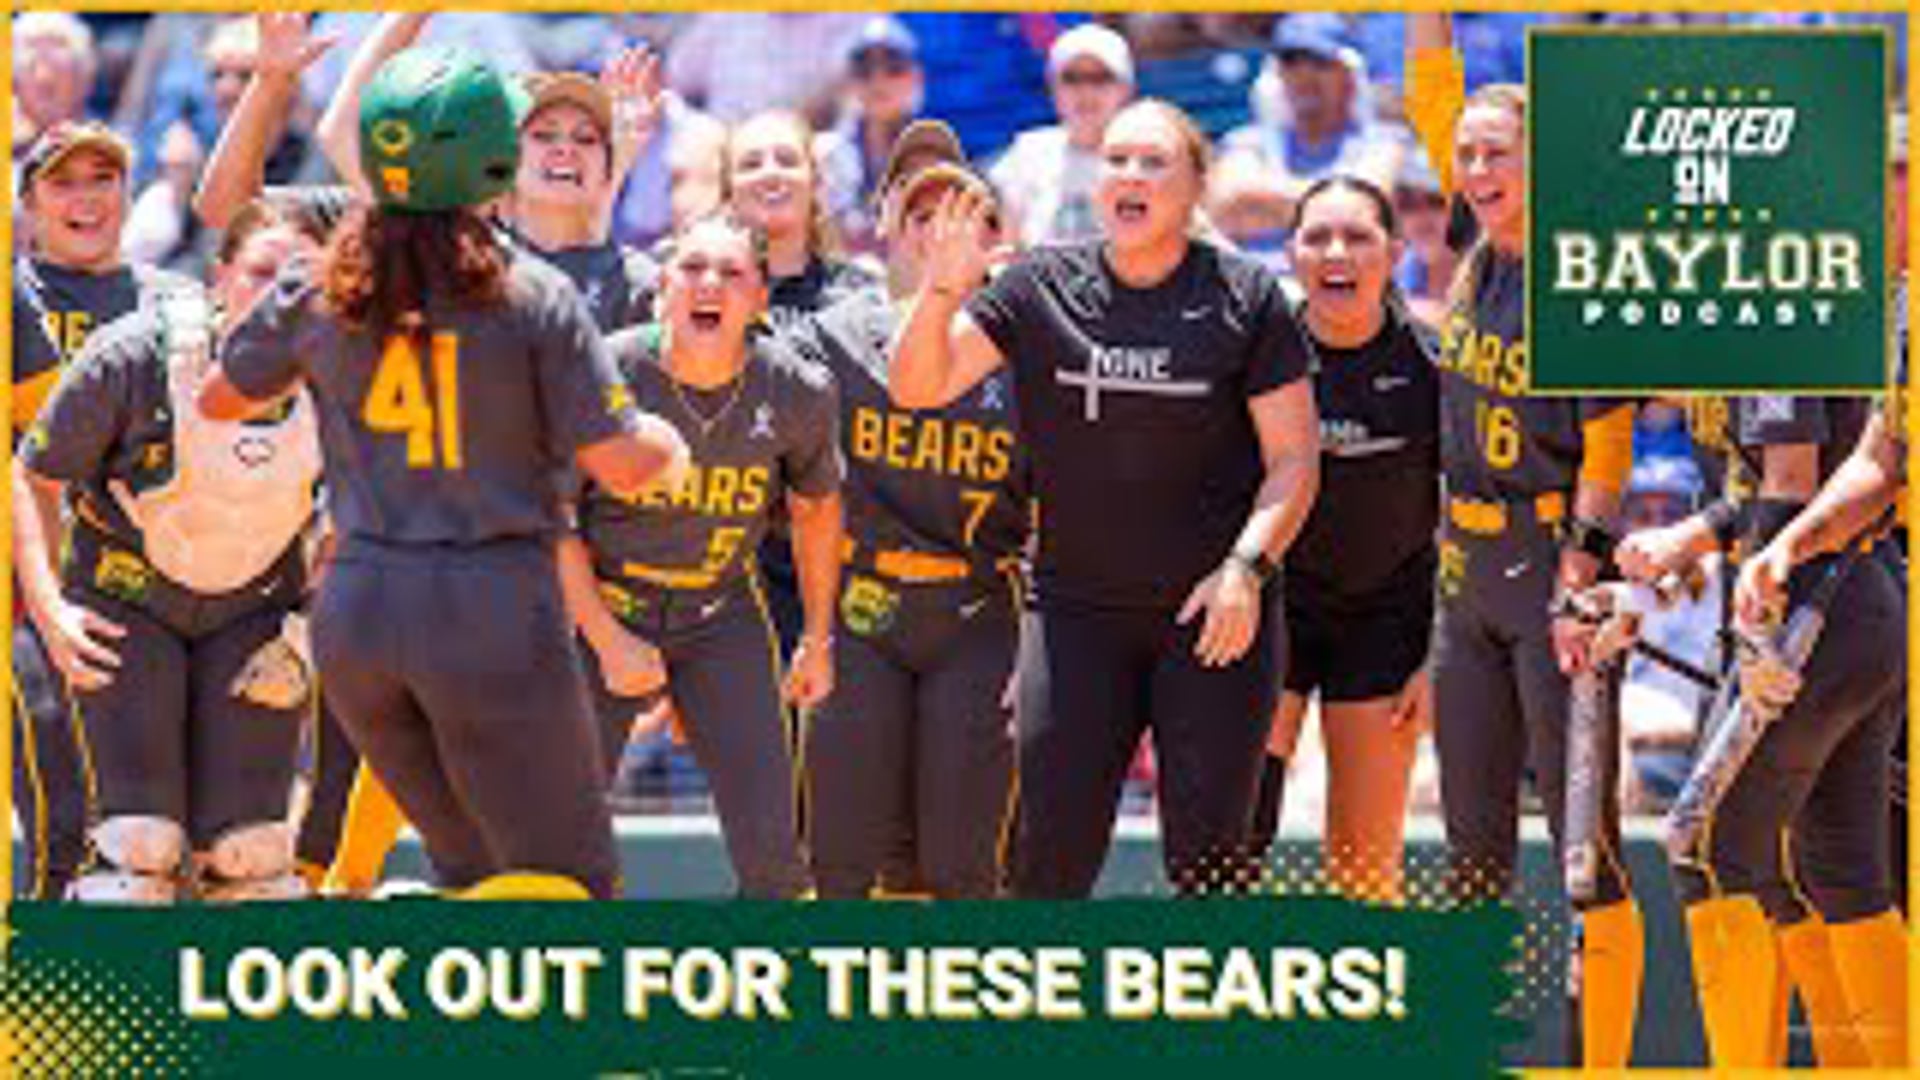 Baylor Softball's season hit a bitter end in Gainesville Sunday, dropping Game 3 of the Super Regionals to the Florida Gators, 5-3.